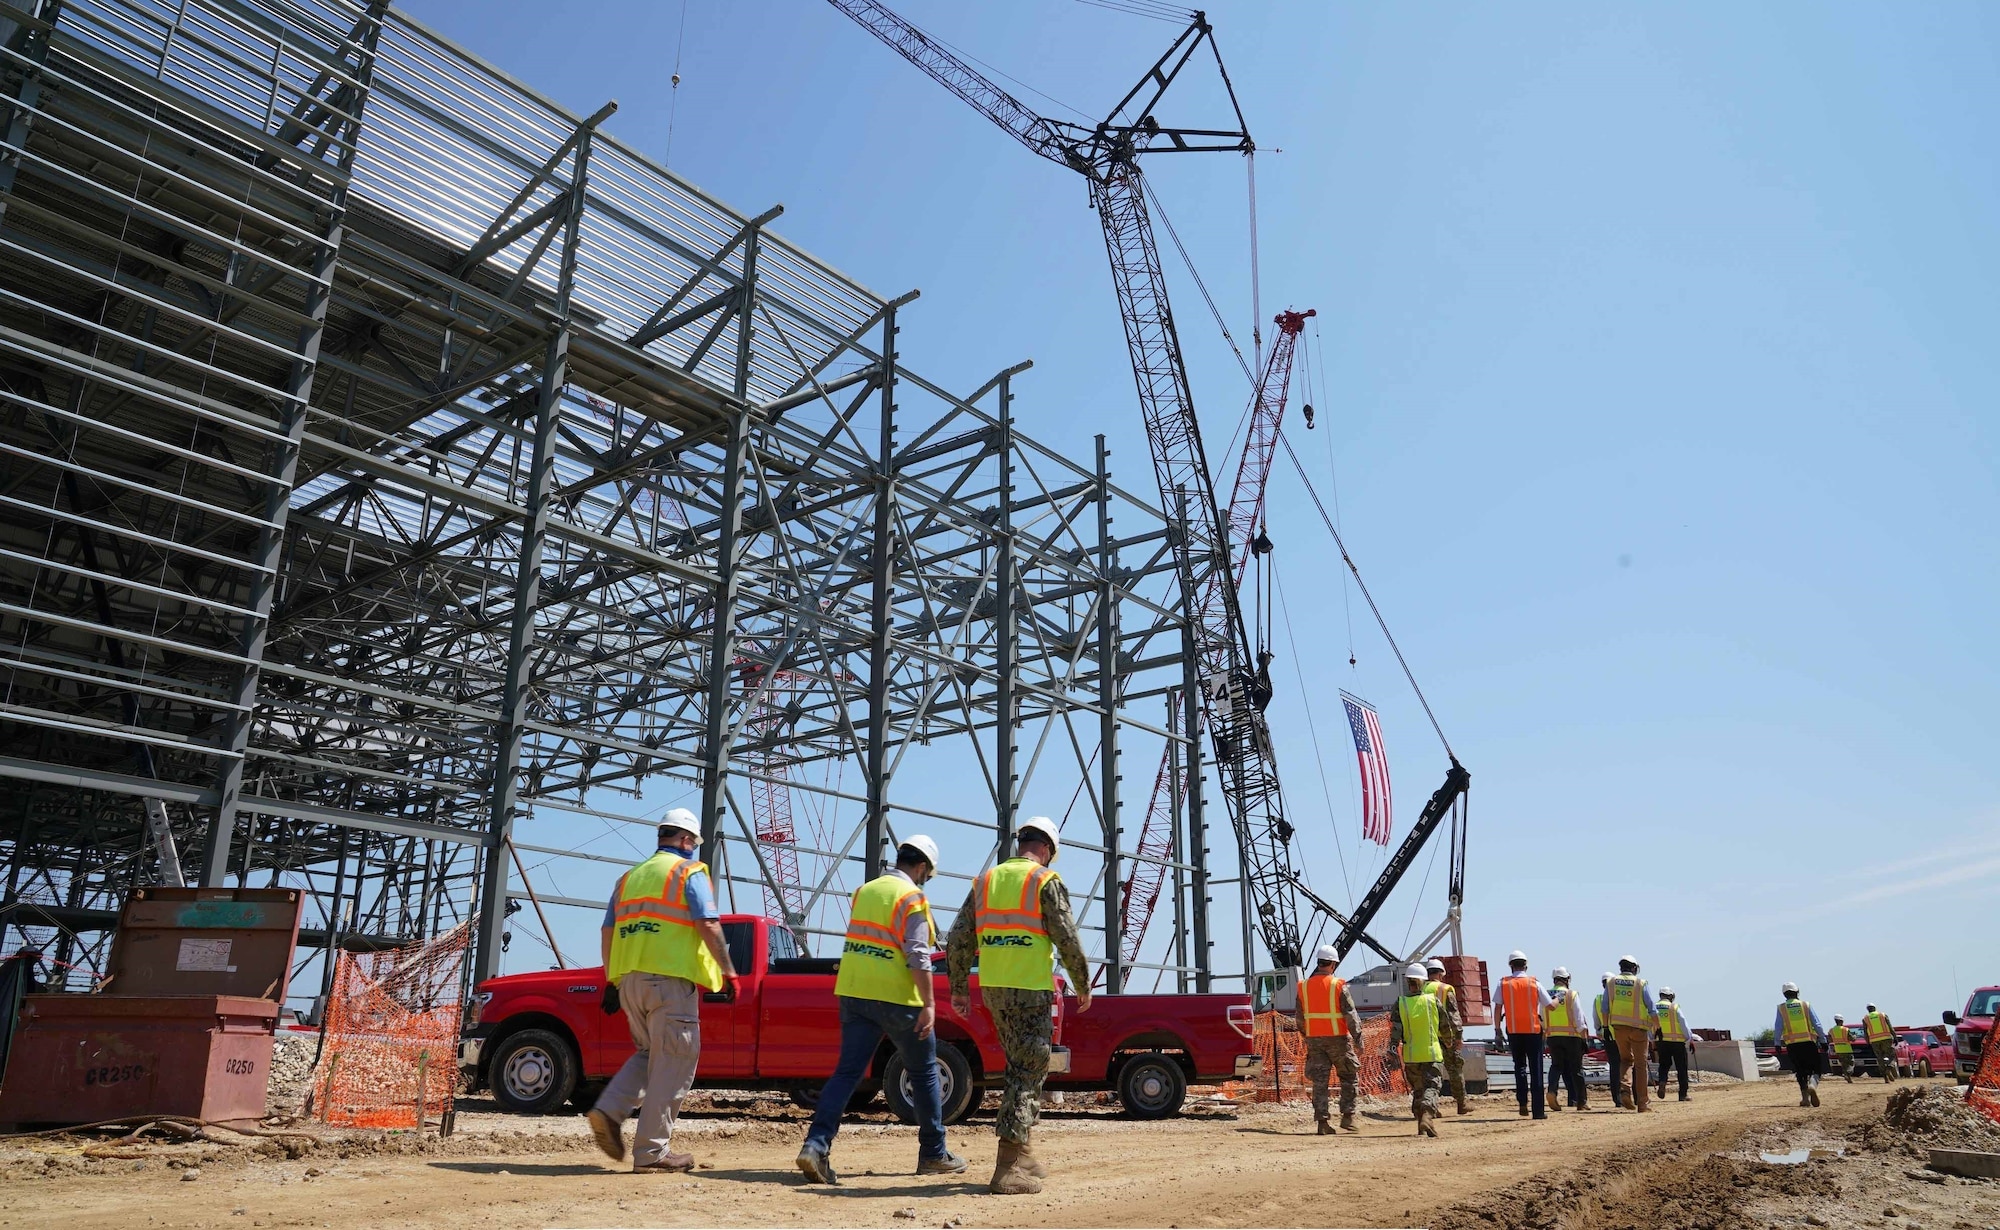 NAVFAC personnel walk around the steel frame of an aircraft hangar in construction.